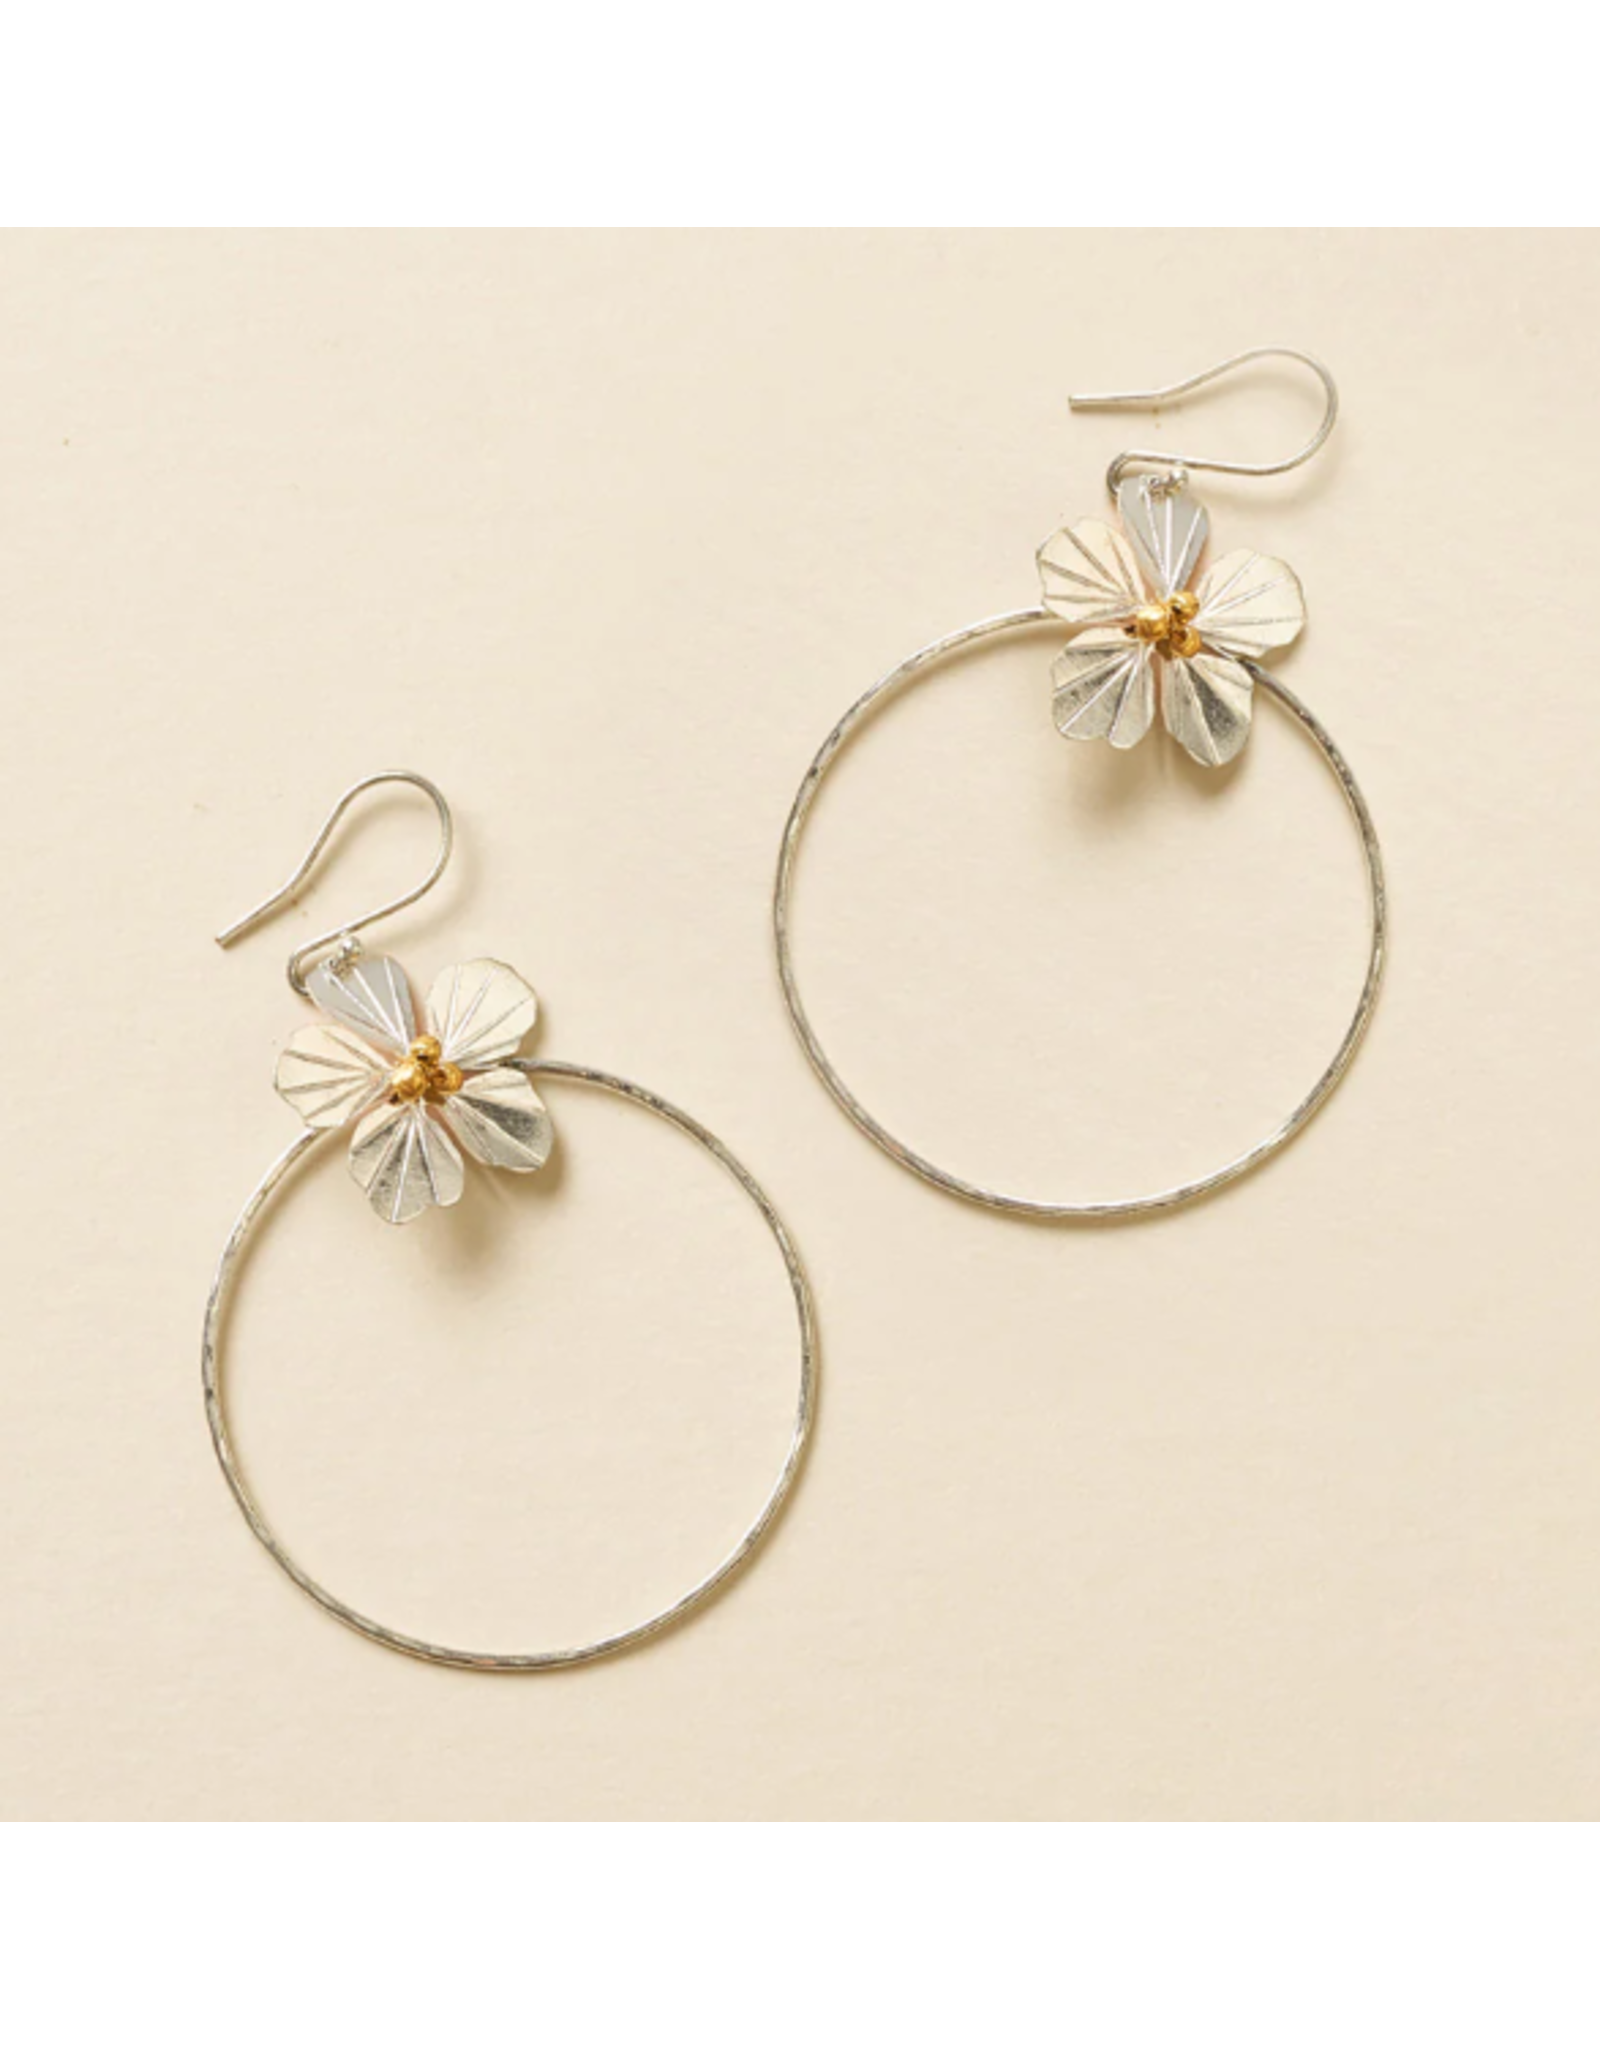 Designer Sterling Silver Gold Plated Flower Earrings at ₹1500 | Azilaa